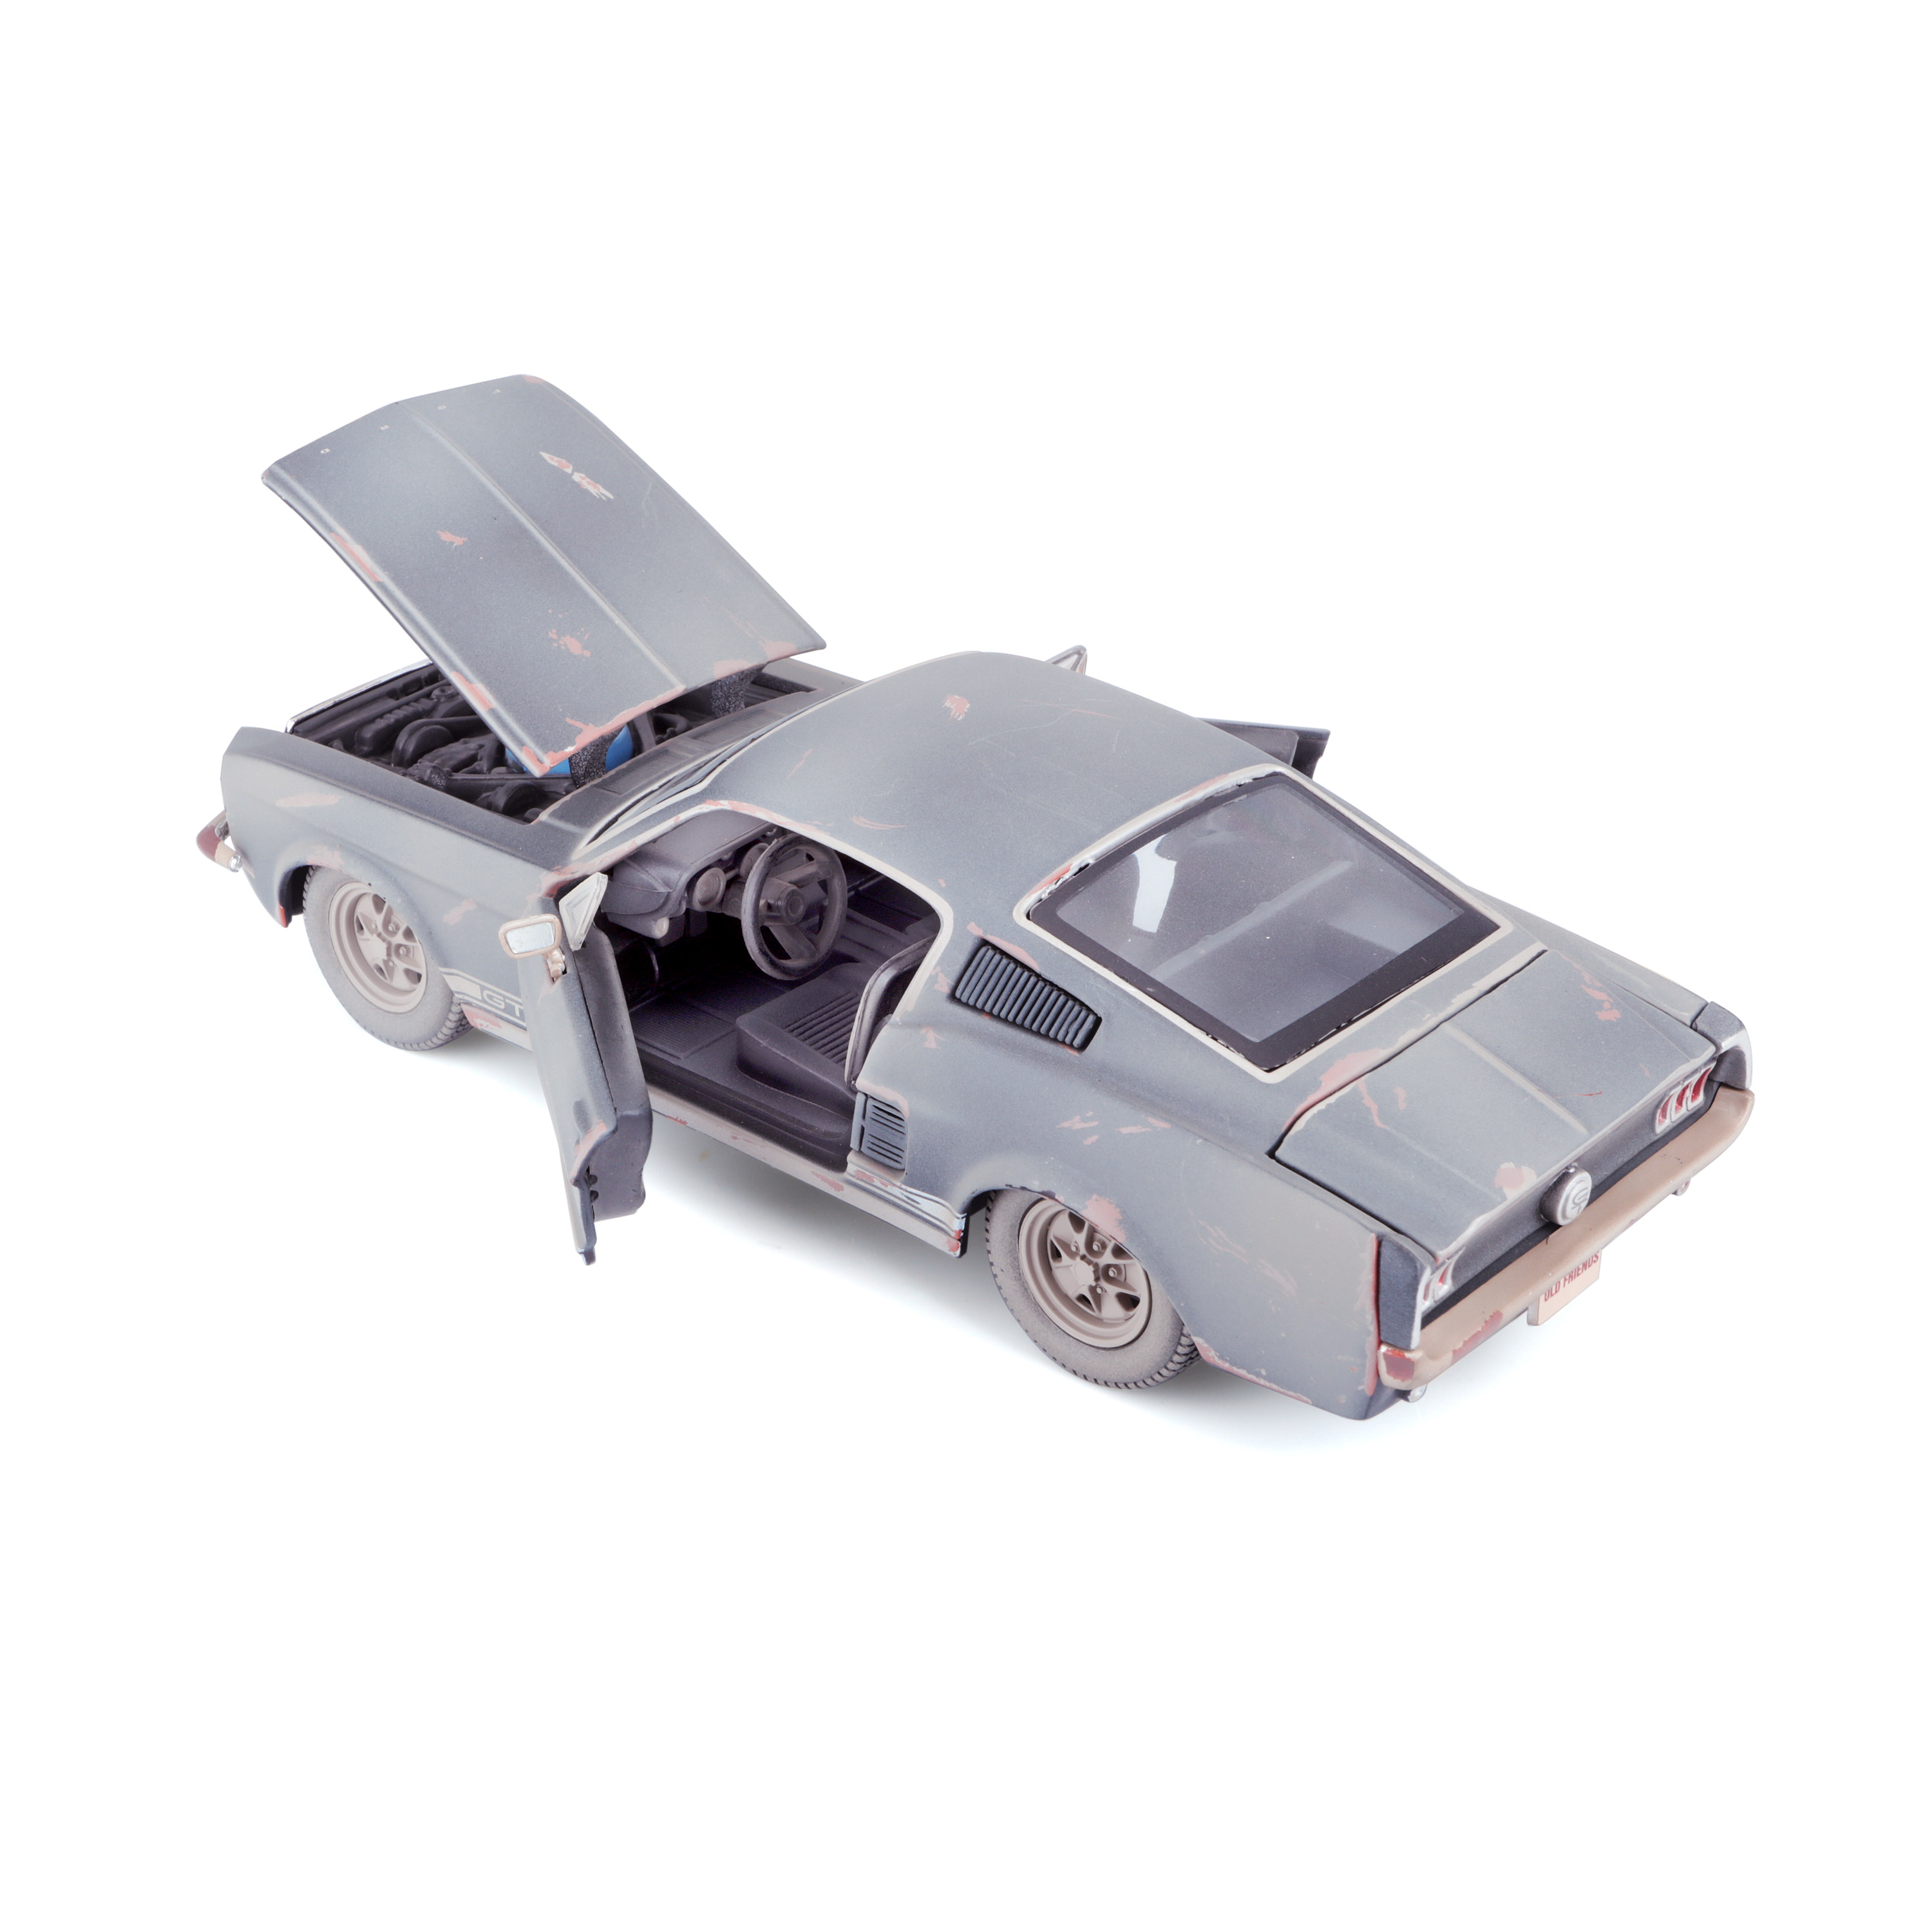 MAISTO Old Friends 1:24) Spielzeugauto (Maßstab GT 1967 Ford Mustang